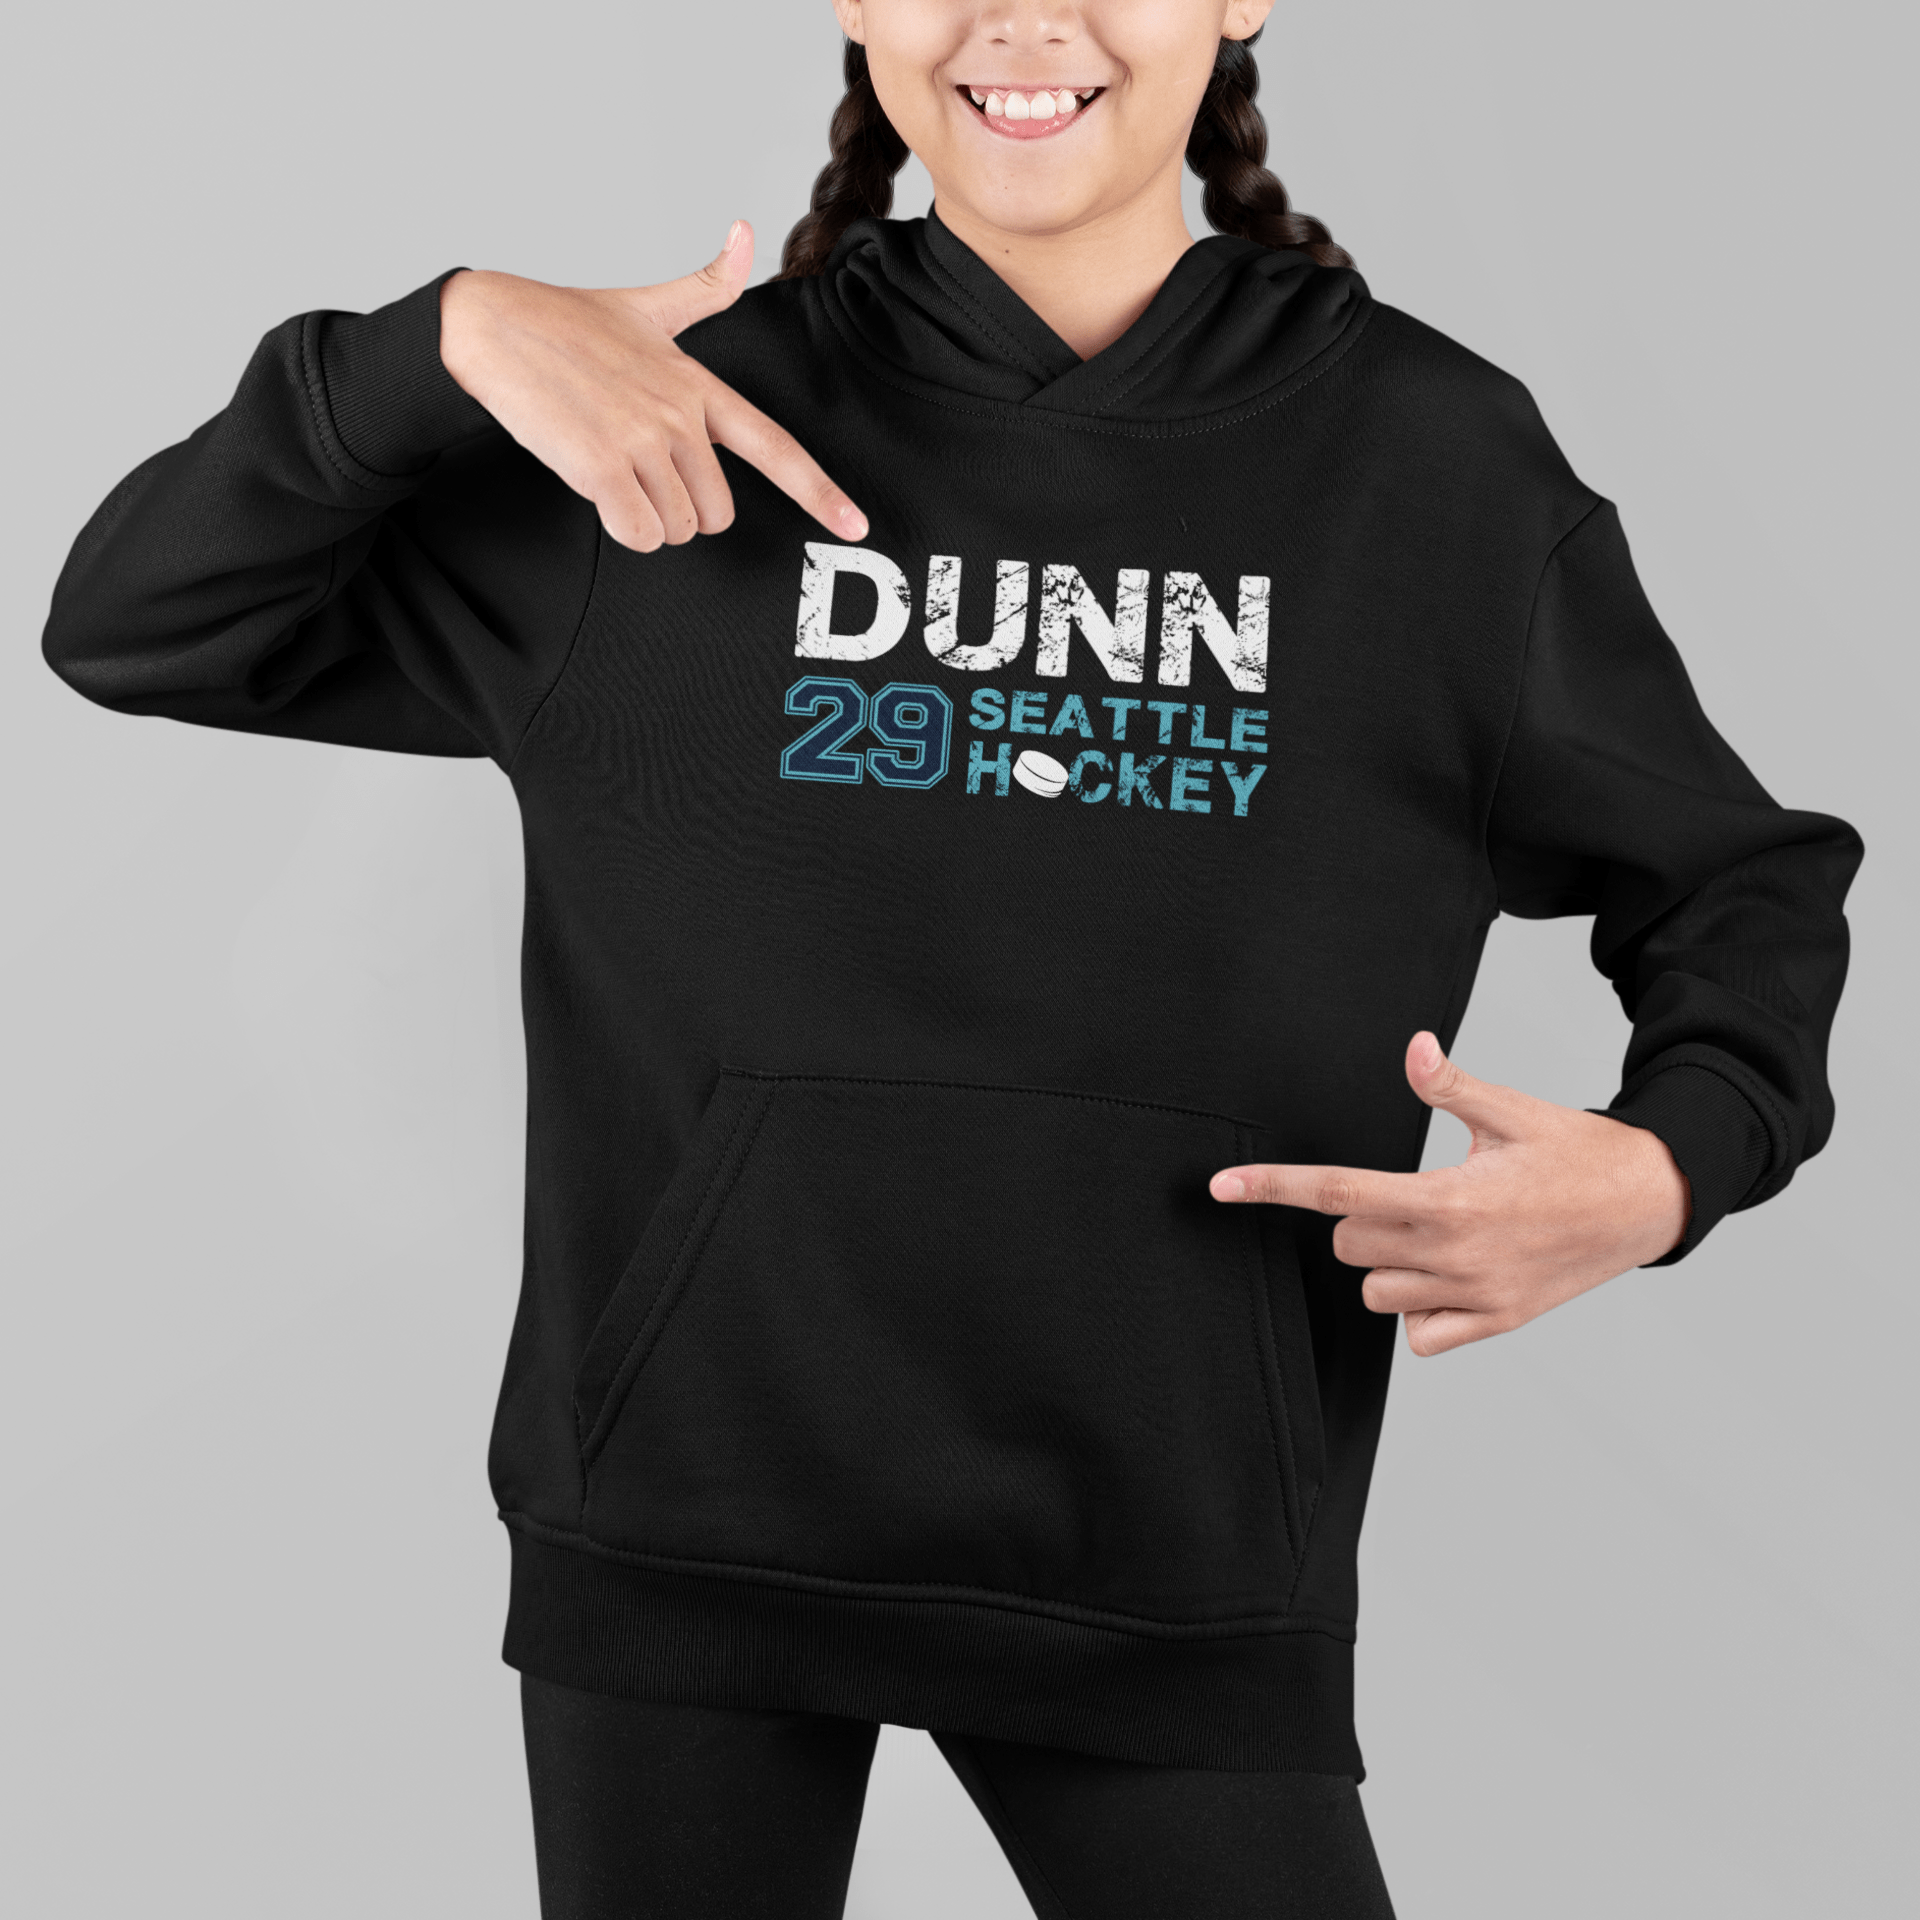 Kids clothes Dunn 29 Seattle Hockey Youth Hooded Sweatshirt